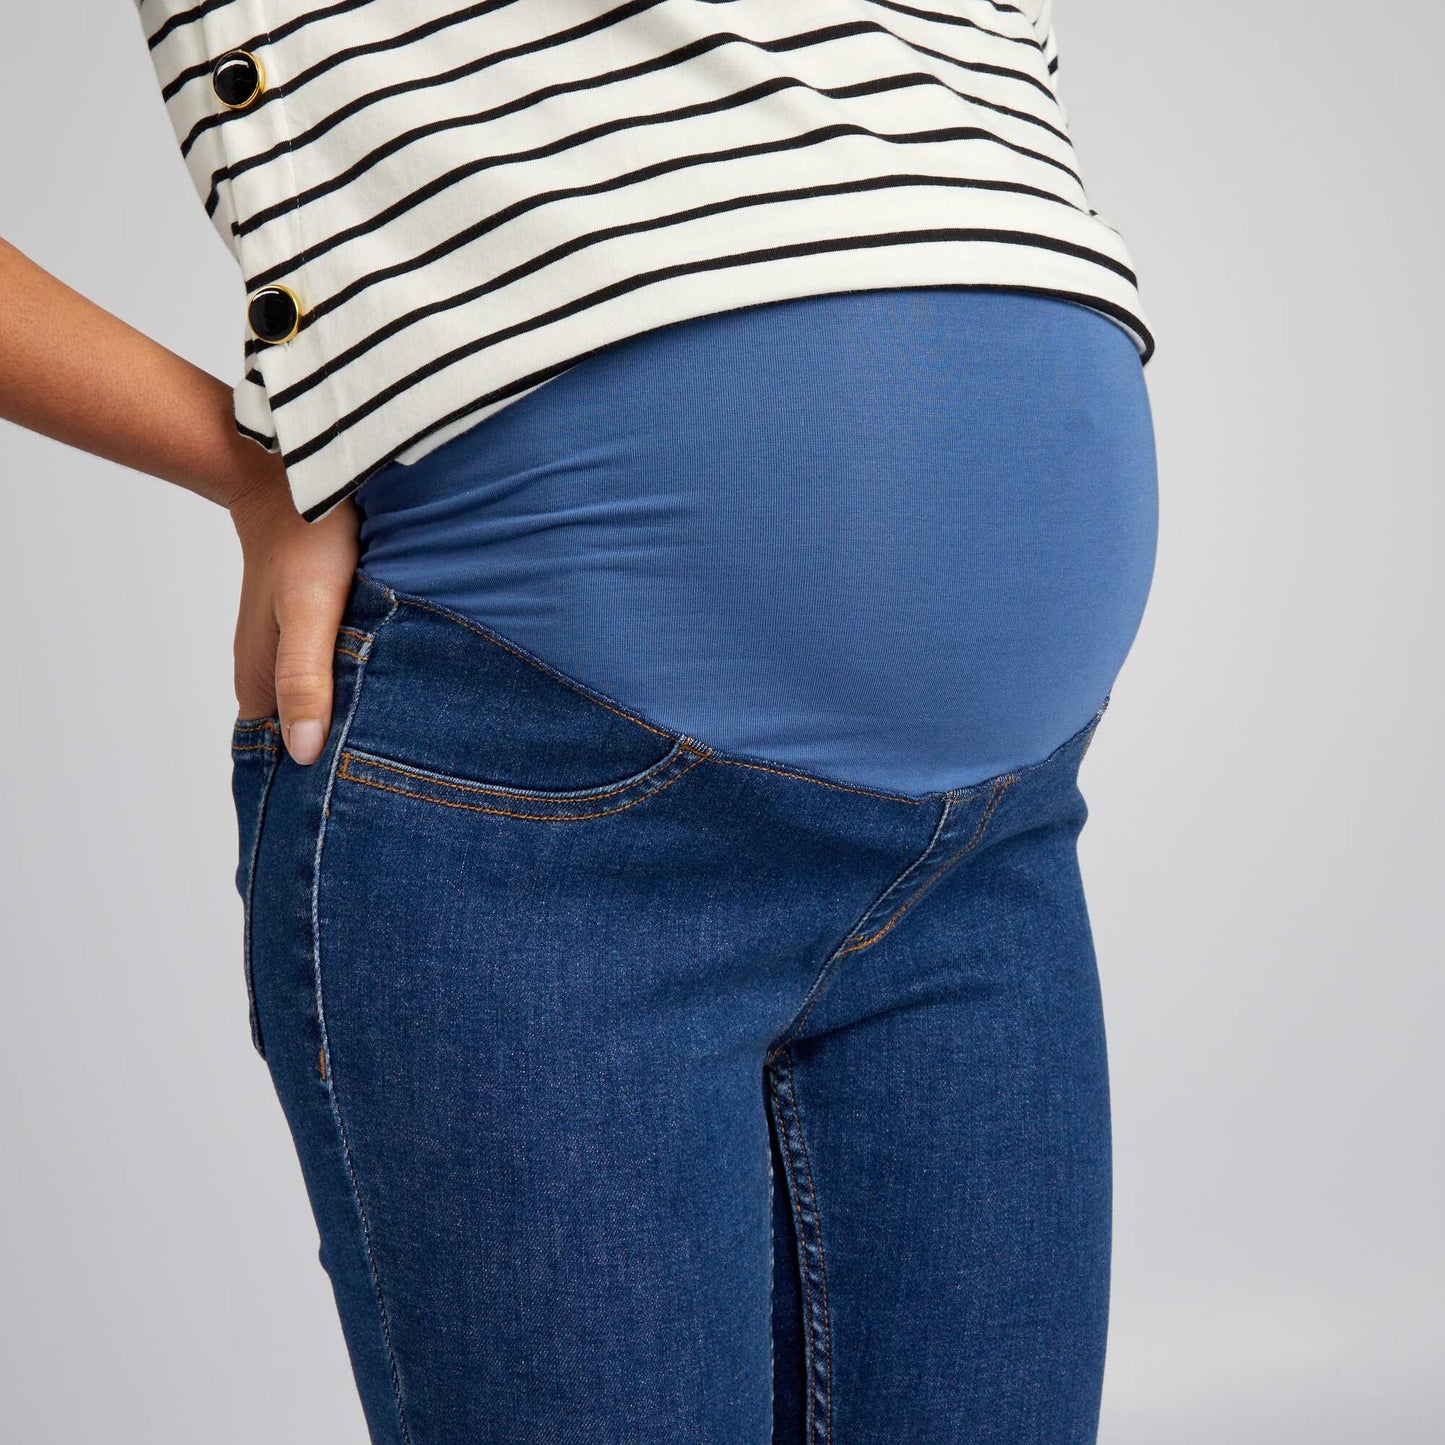 Maternity jeggings with support panel BLUE